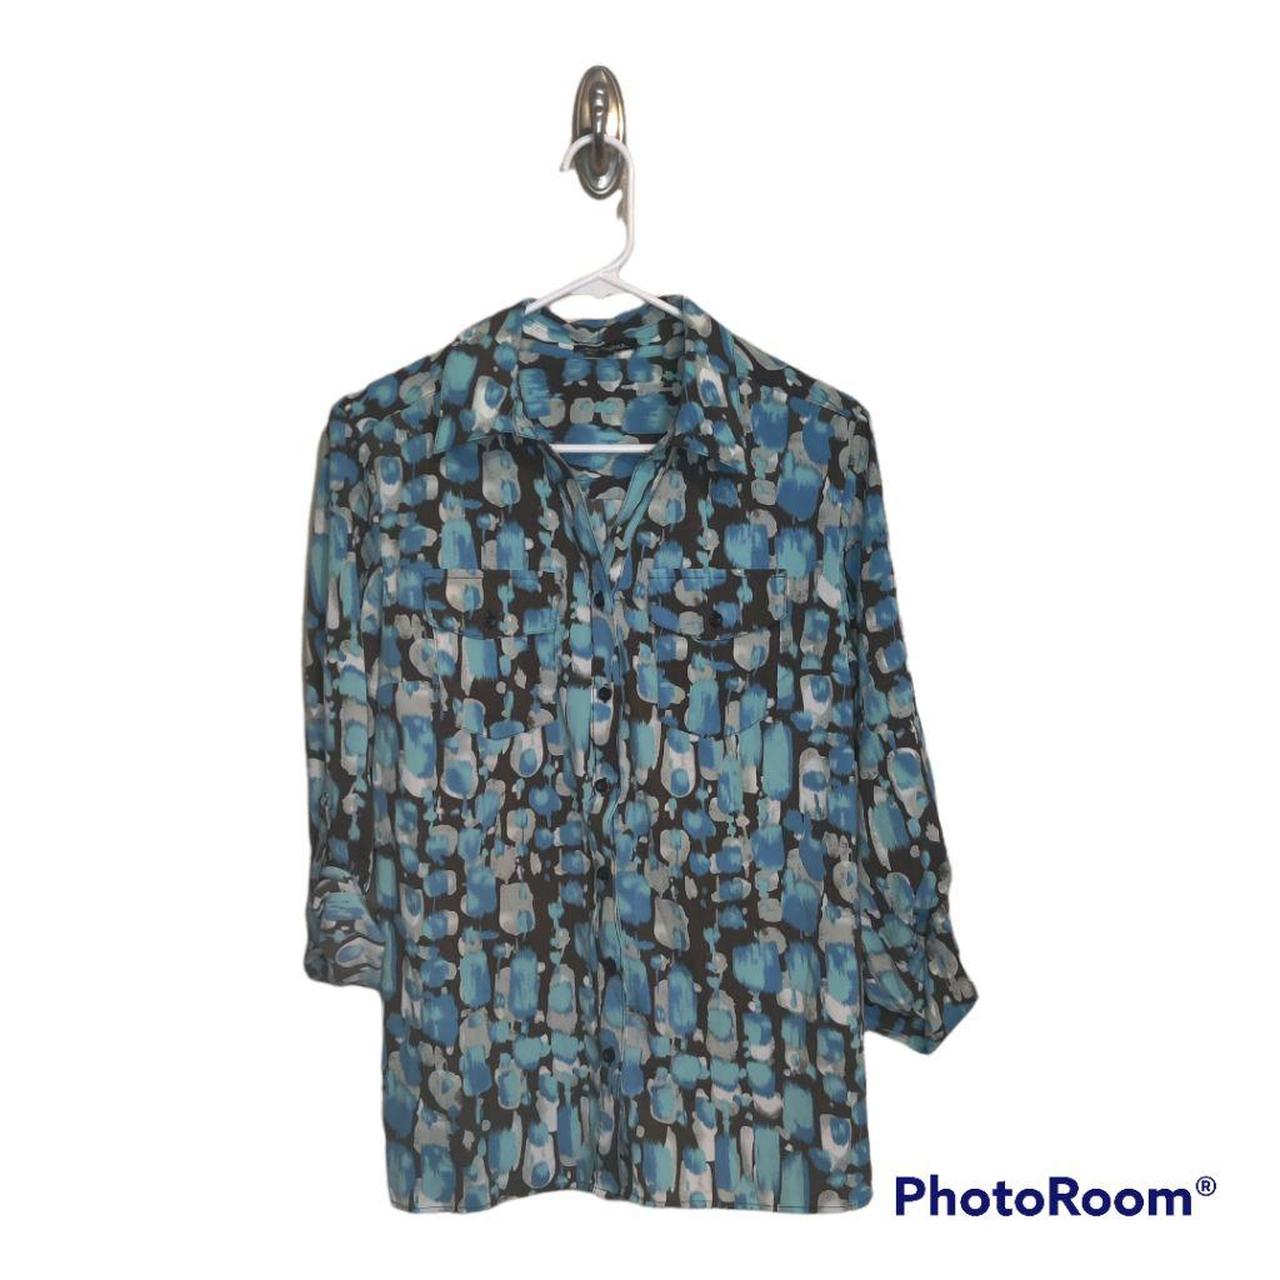 Product Image 1 - This is a blue, black,